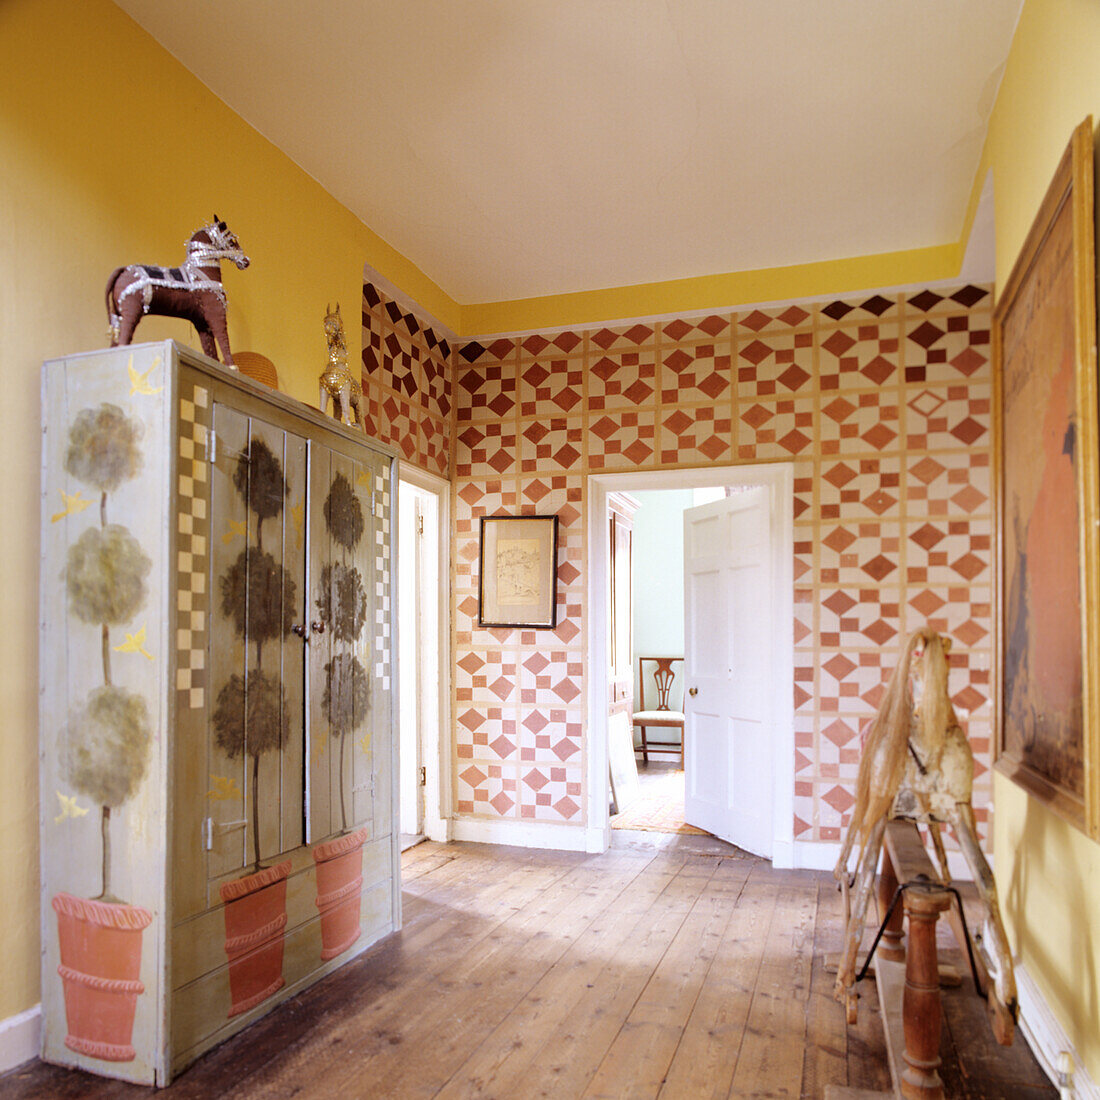 Corridor with geometric wallpaper pattern and vintage furniture